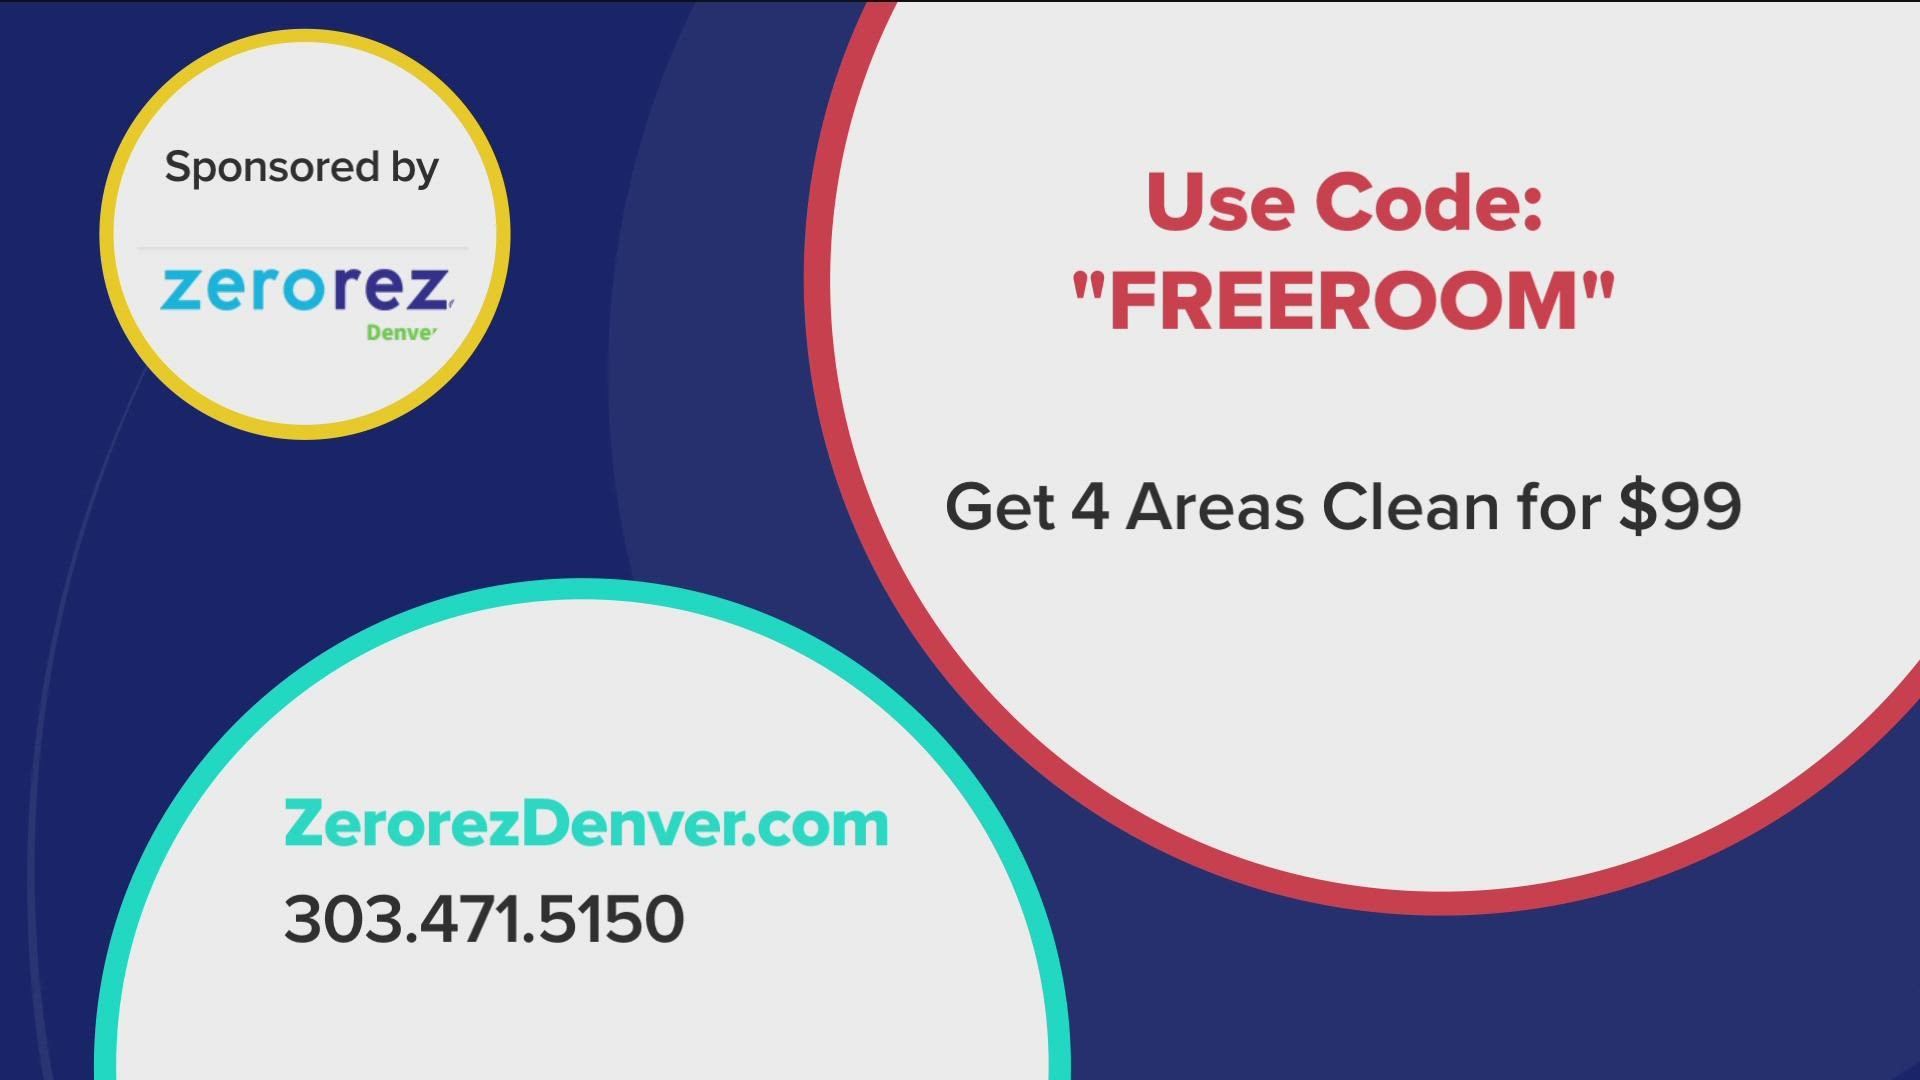 Call 303.471.5150 or visit ZerorezDenver.com to get started. Right now you can get 4 rooms cleaned for just $99! **PAID CONTENT**